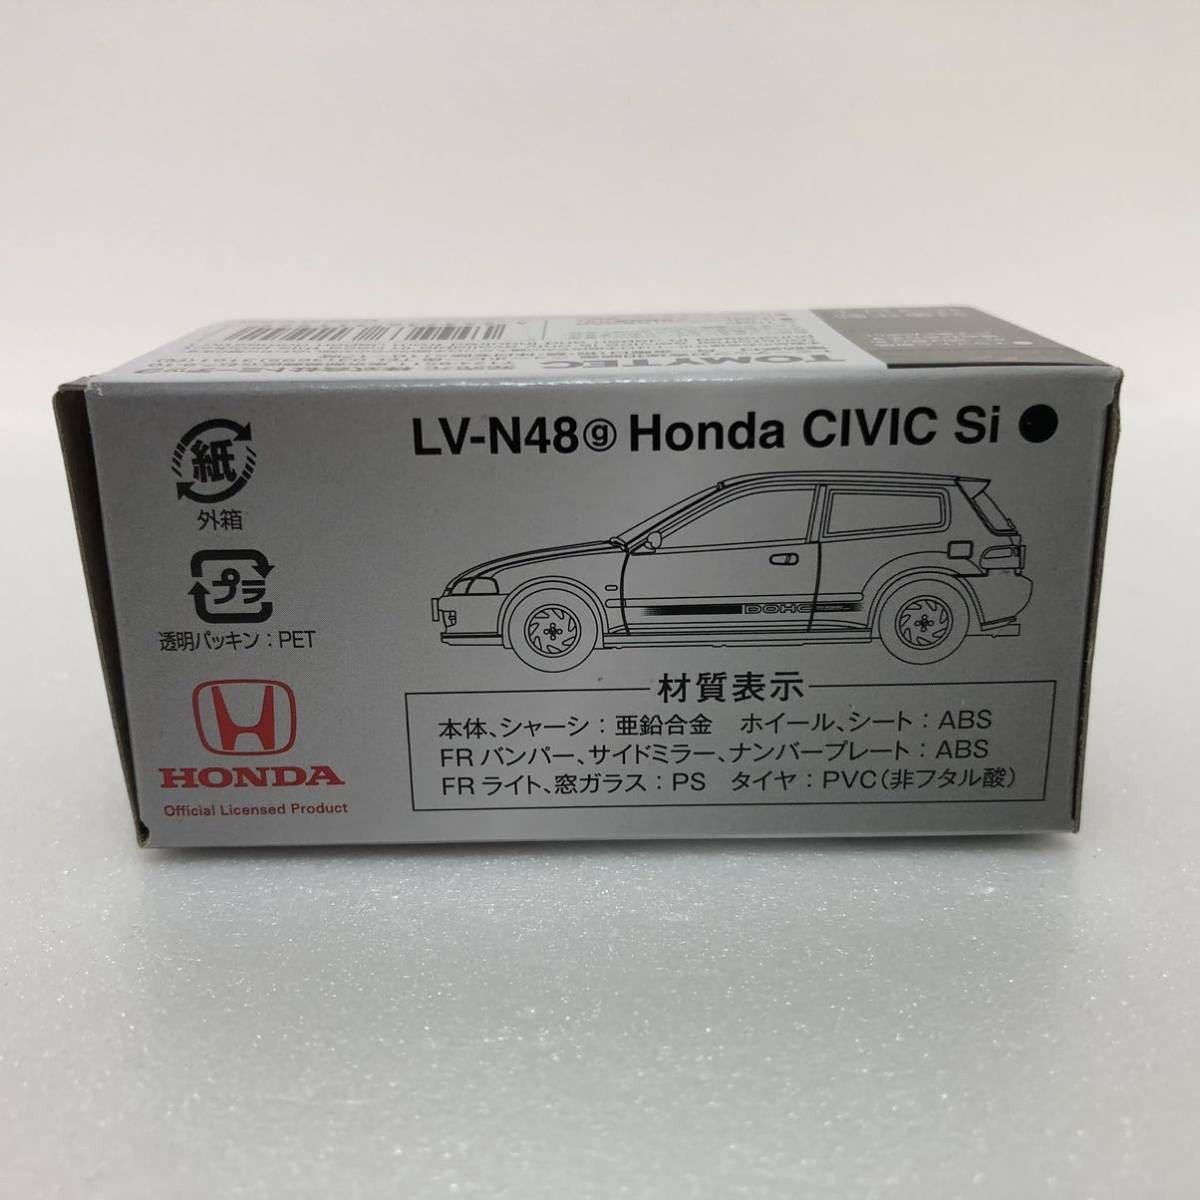 * new goods * unopened * LV-N48g Honda Civic Si 20 anniversary car (92 year ) Tomica Limited Vintage Neo 